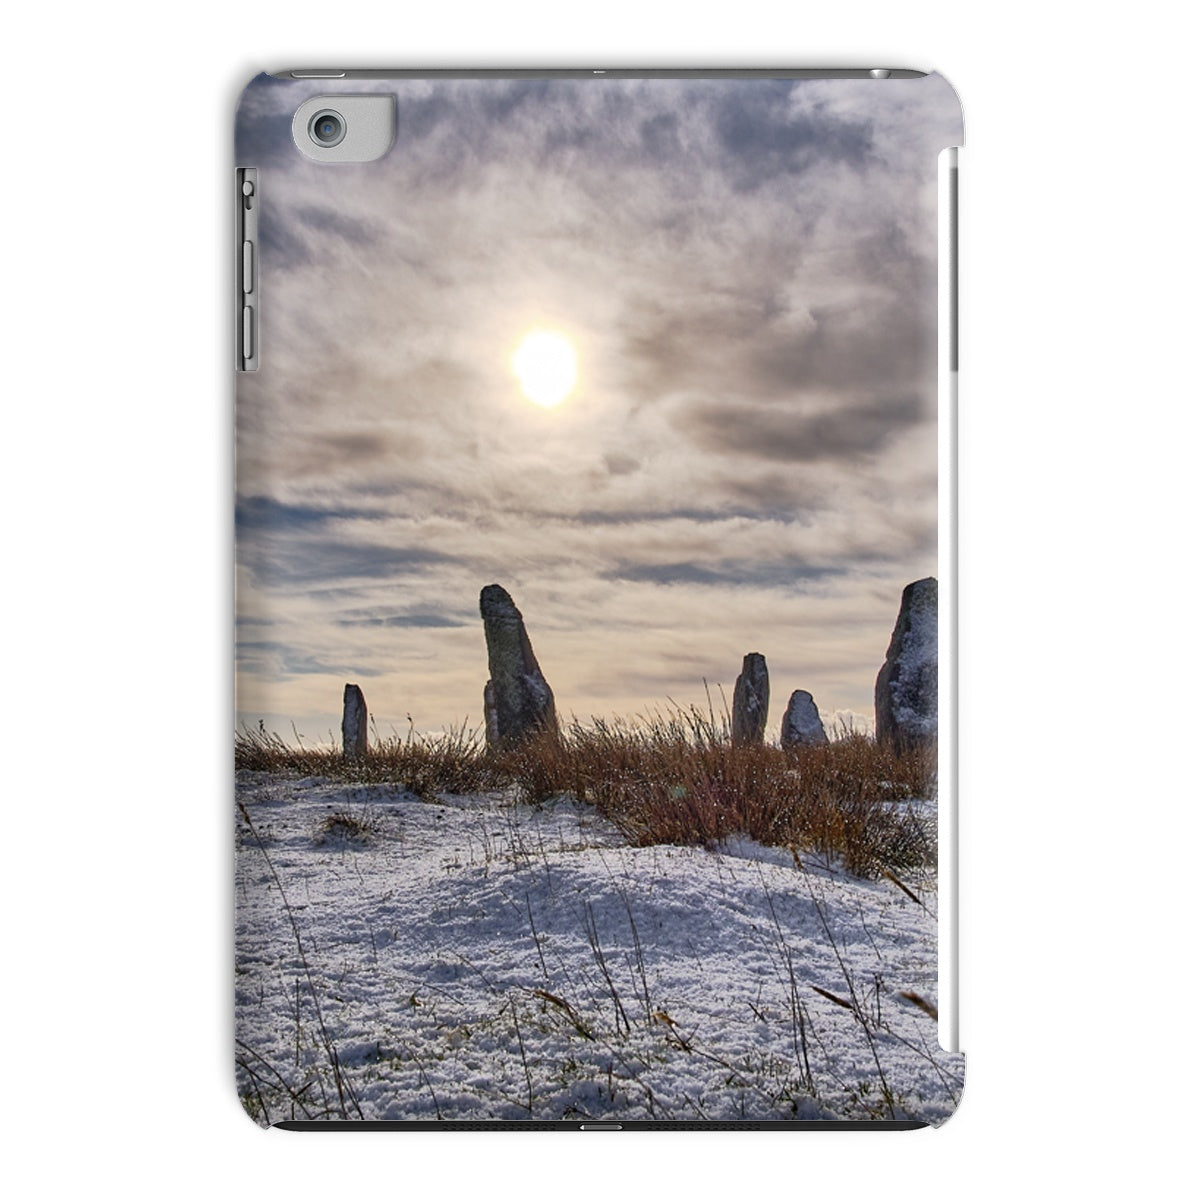 Cnoc Fillibhir Bheag/Callanish III in snow and sunshine Tablet Cases